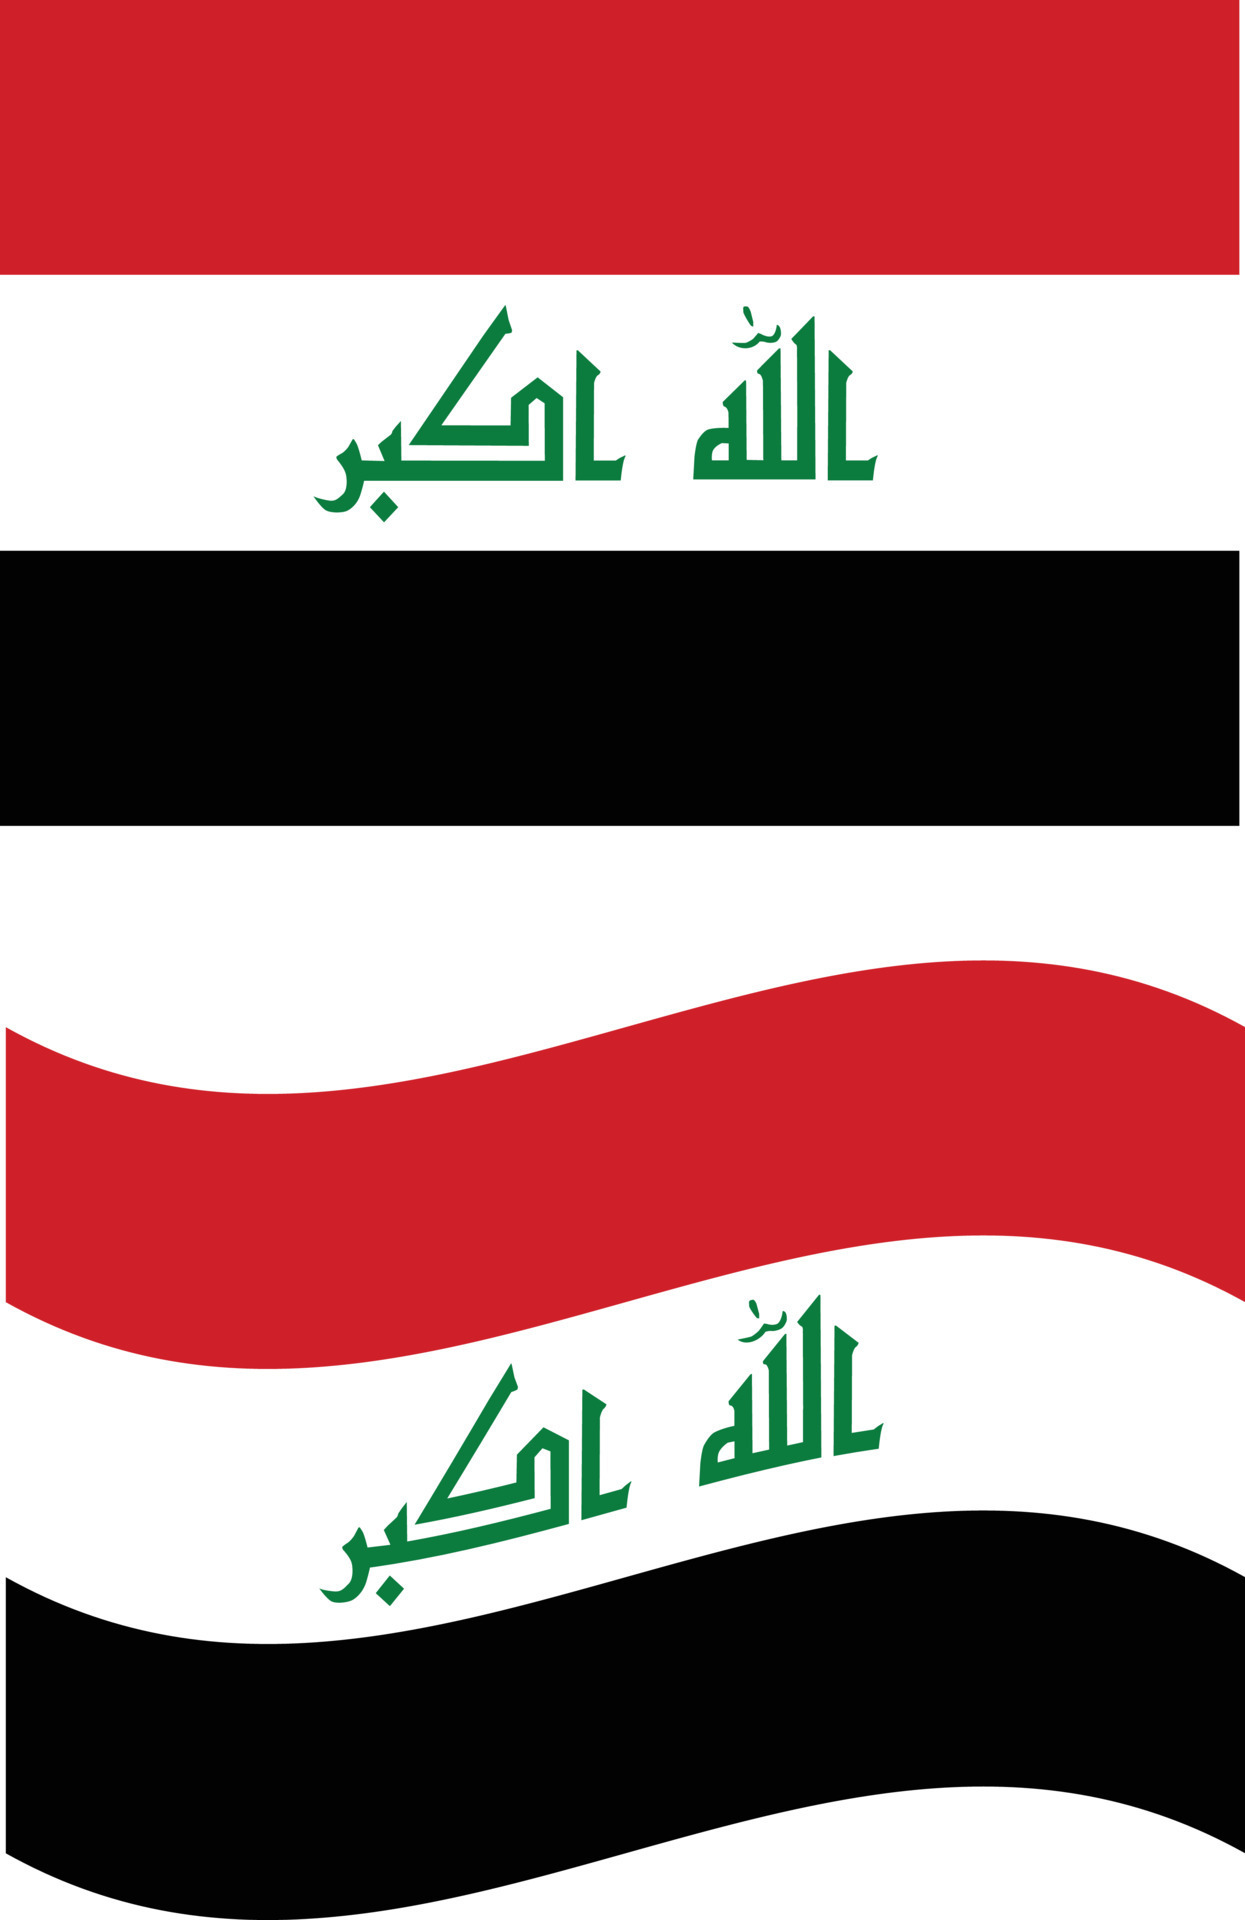 https://static.vecteezy.com/system/resources/previews/018/939/163/original/waving-flag-of-iraq-iraq-flag-on-white-background-flat-style-vector.jpg